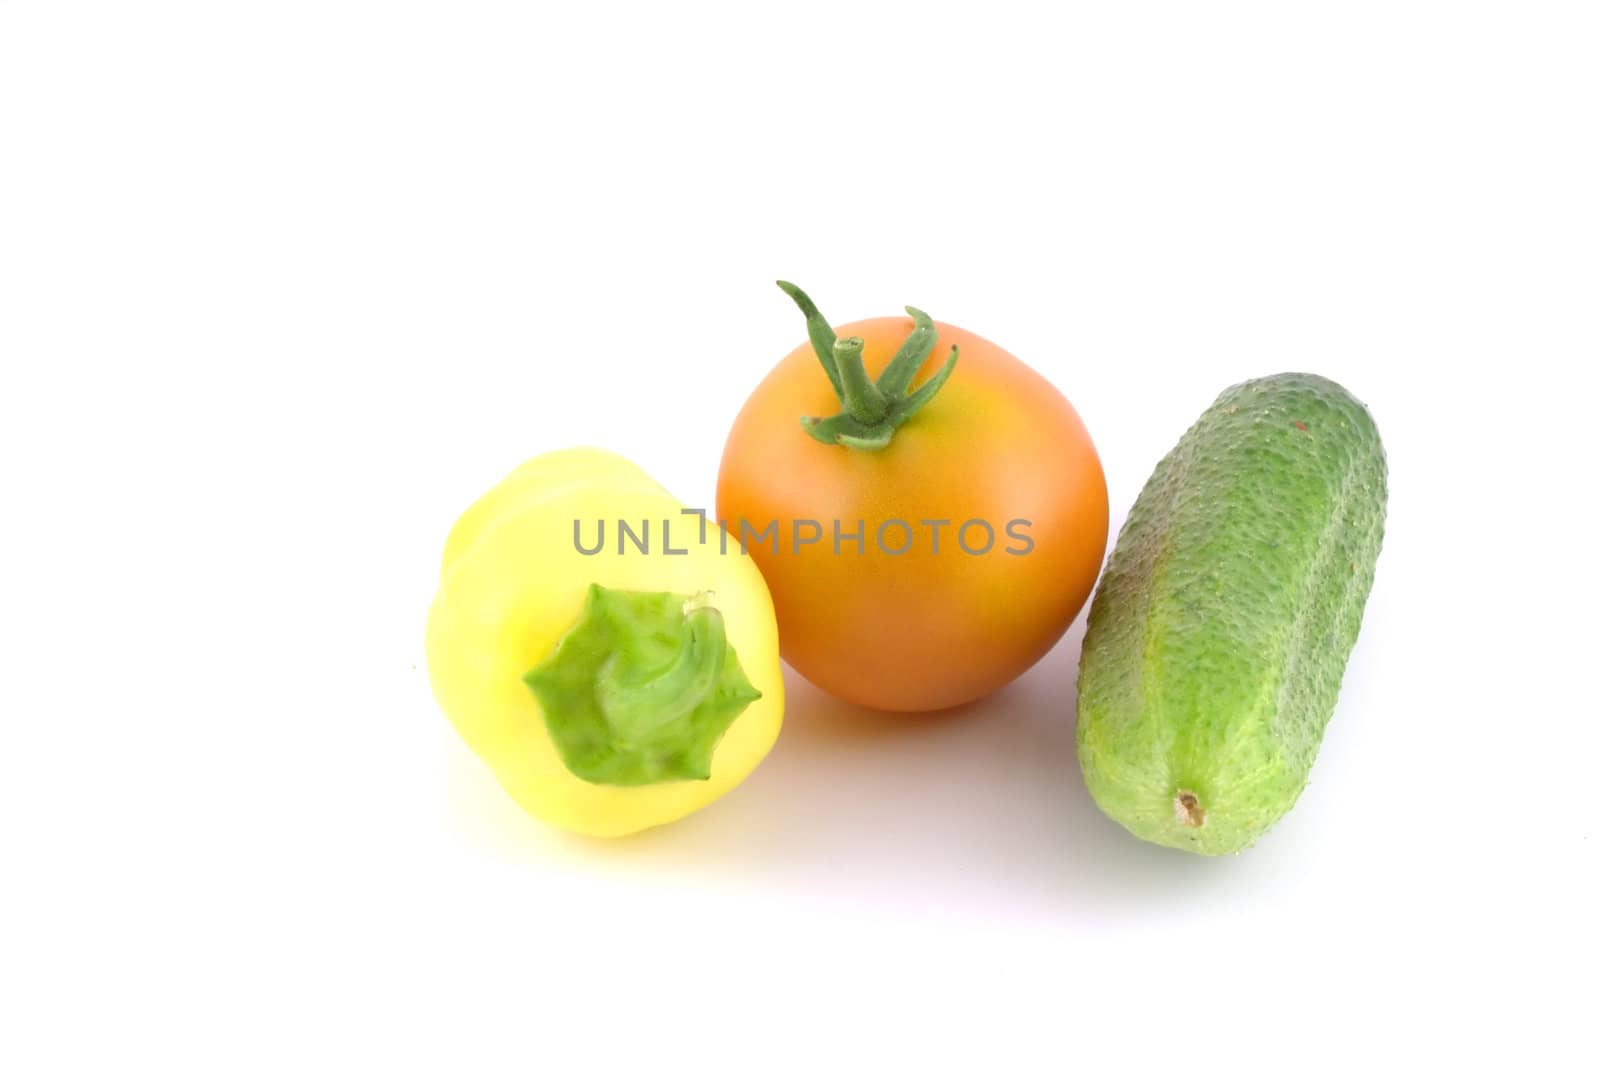 Cucumber, tomato and pepper by sergpet